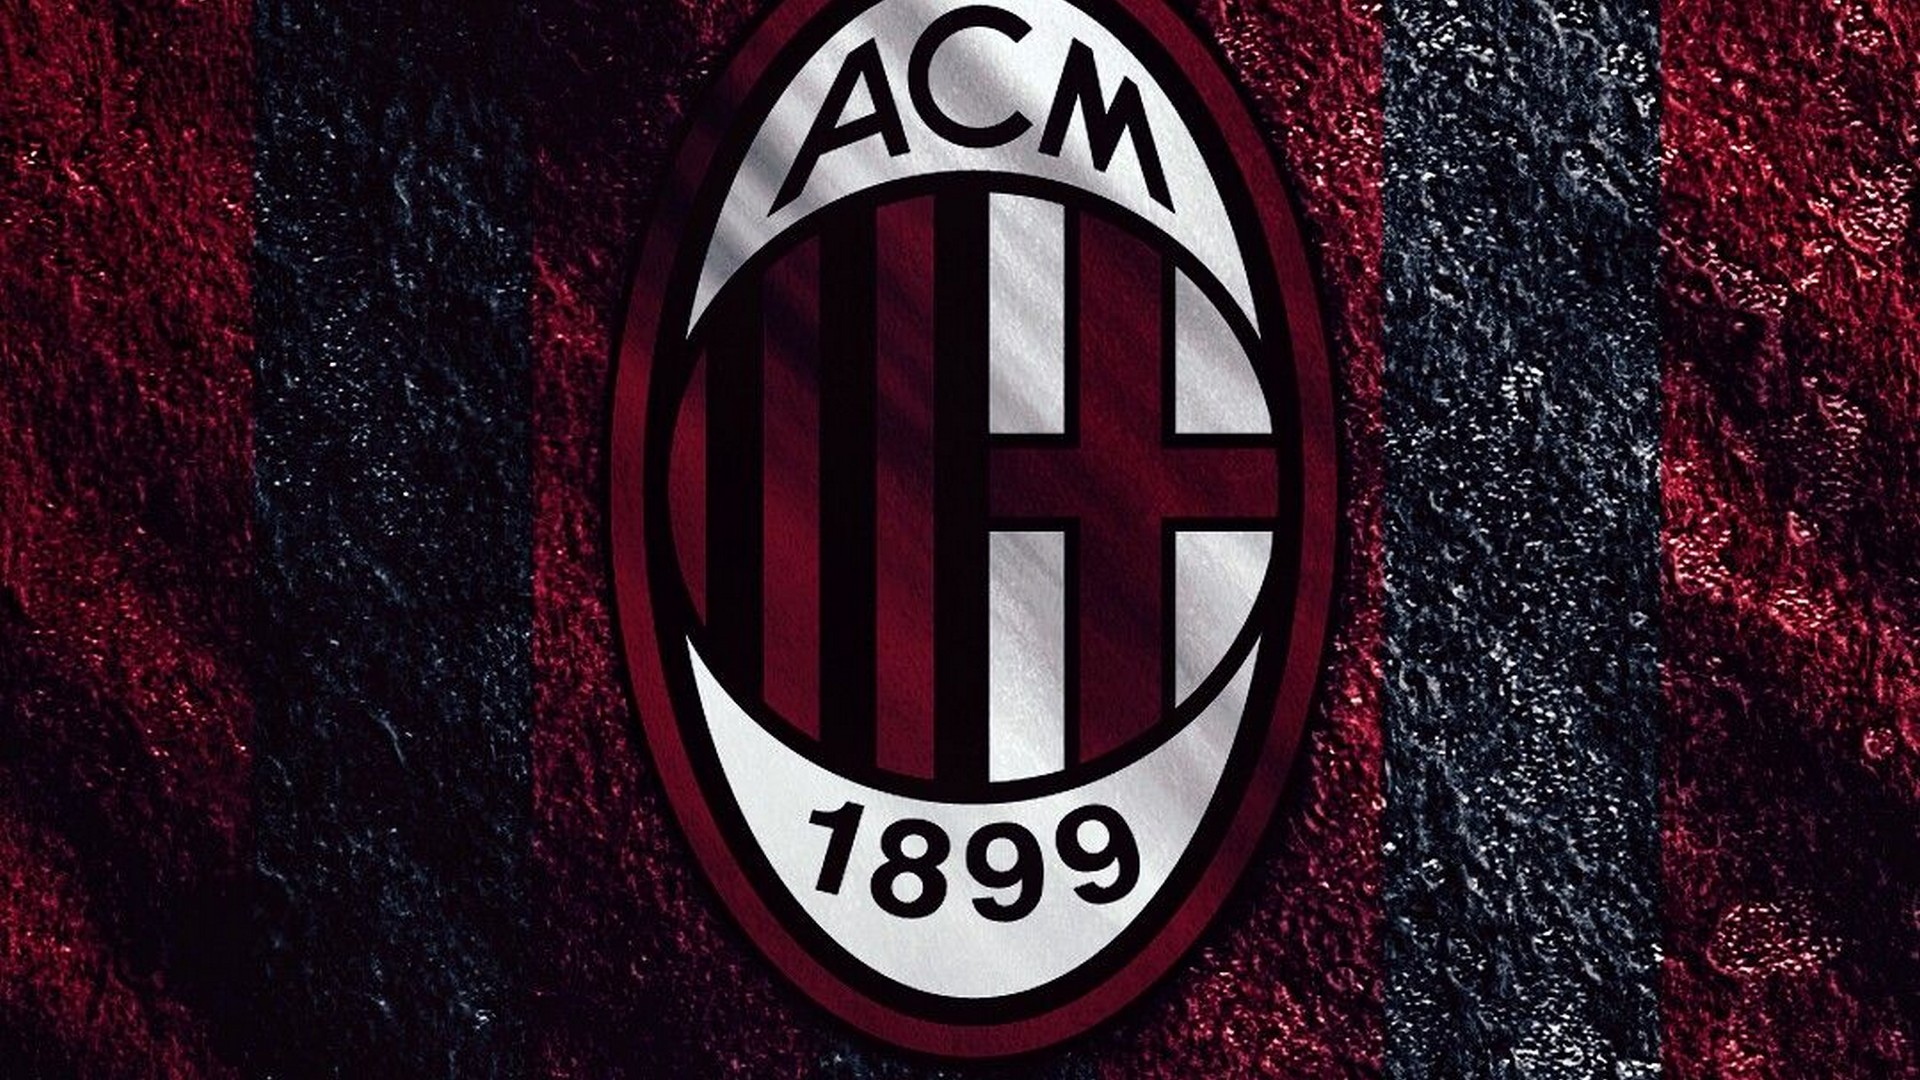 HD Backgrounds AC Milan with high-resolution 1920x1080 pixel. You can use this wallpaper for your Desktop Computers, Mac Screensavers, Windows Backgrounds, iPhone Wallpapers, Tablet or Android Lock screen and another Mobile device